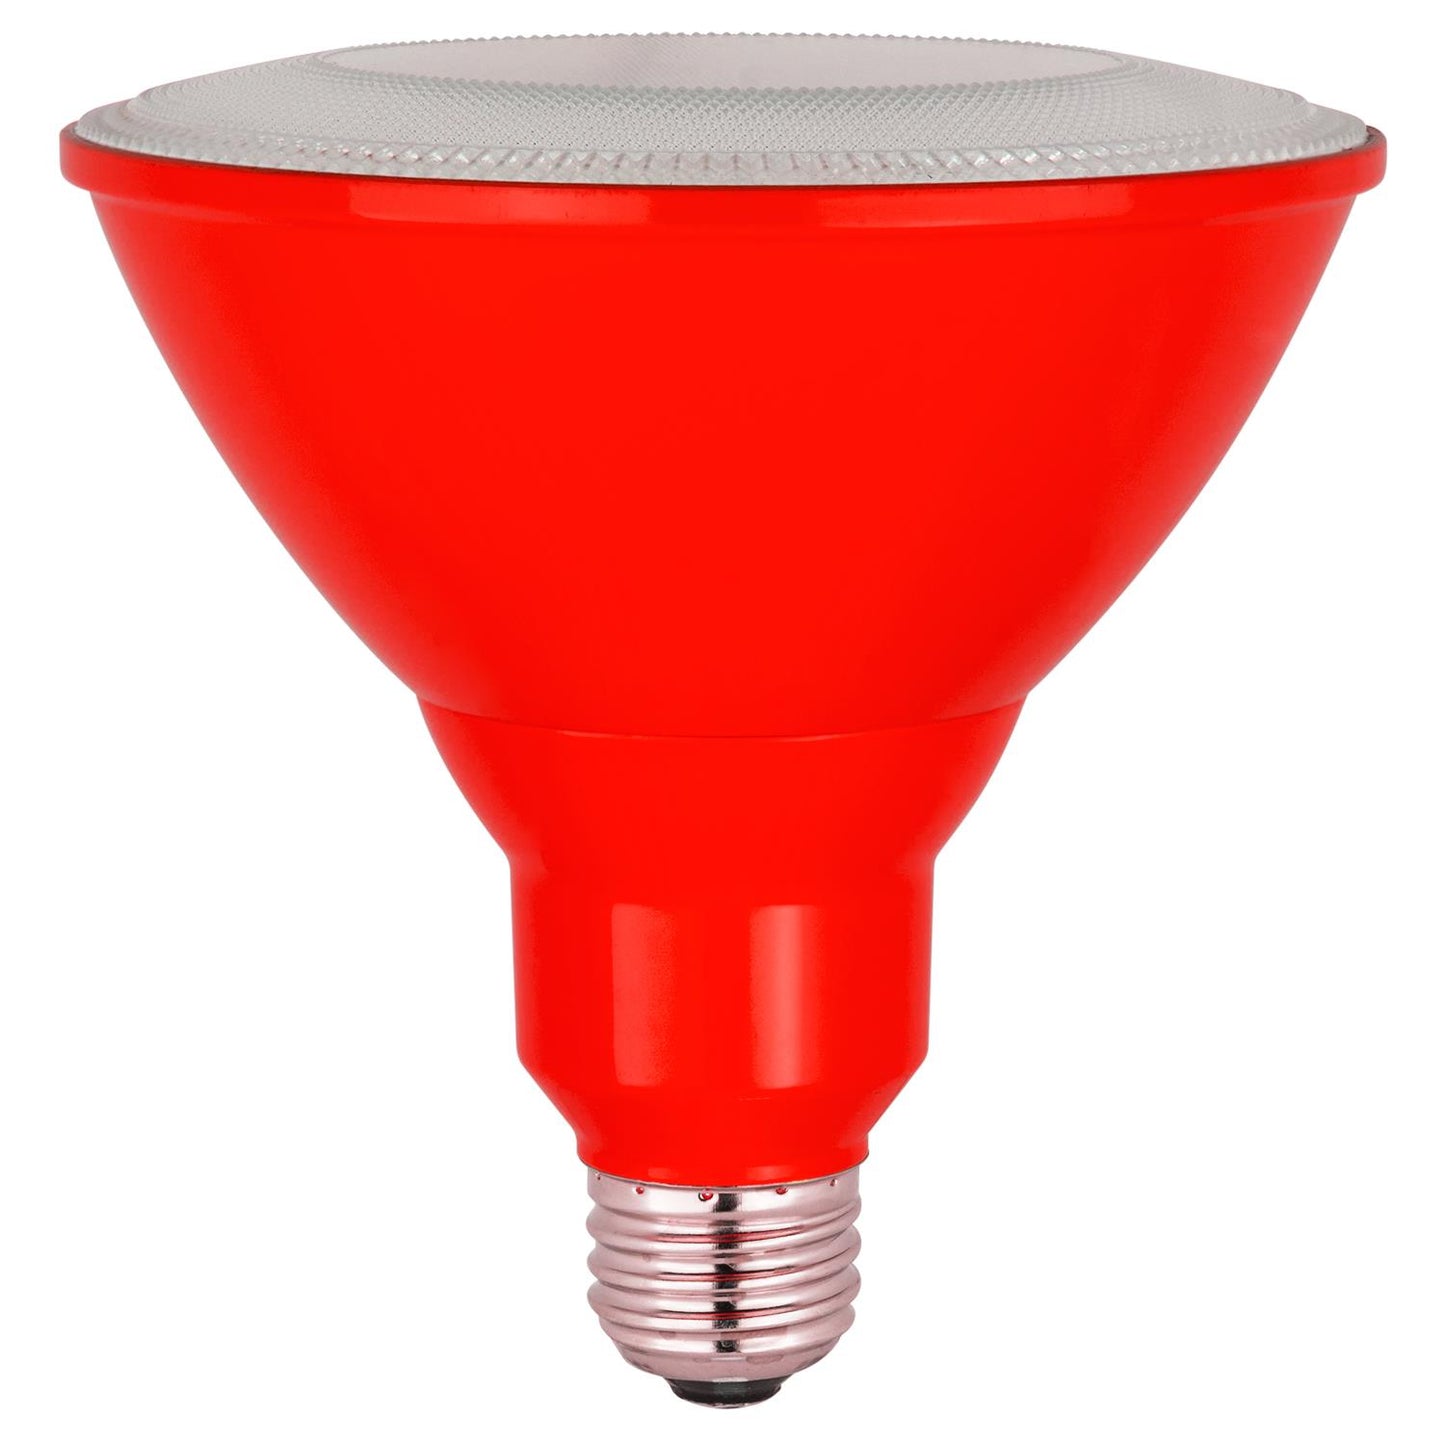 Sunlite LED PAR38 Red Floodlight Bulb, 8W (25W Equivalent), Medium (E26) Base, Indoor, Outdoor, Wet Location, Turtle Safe and Wildlife Friendly, 25,000 Hour Lifespan, UL Listed